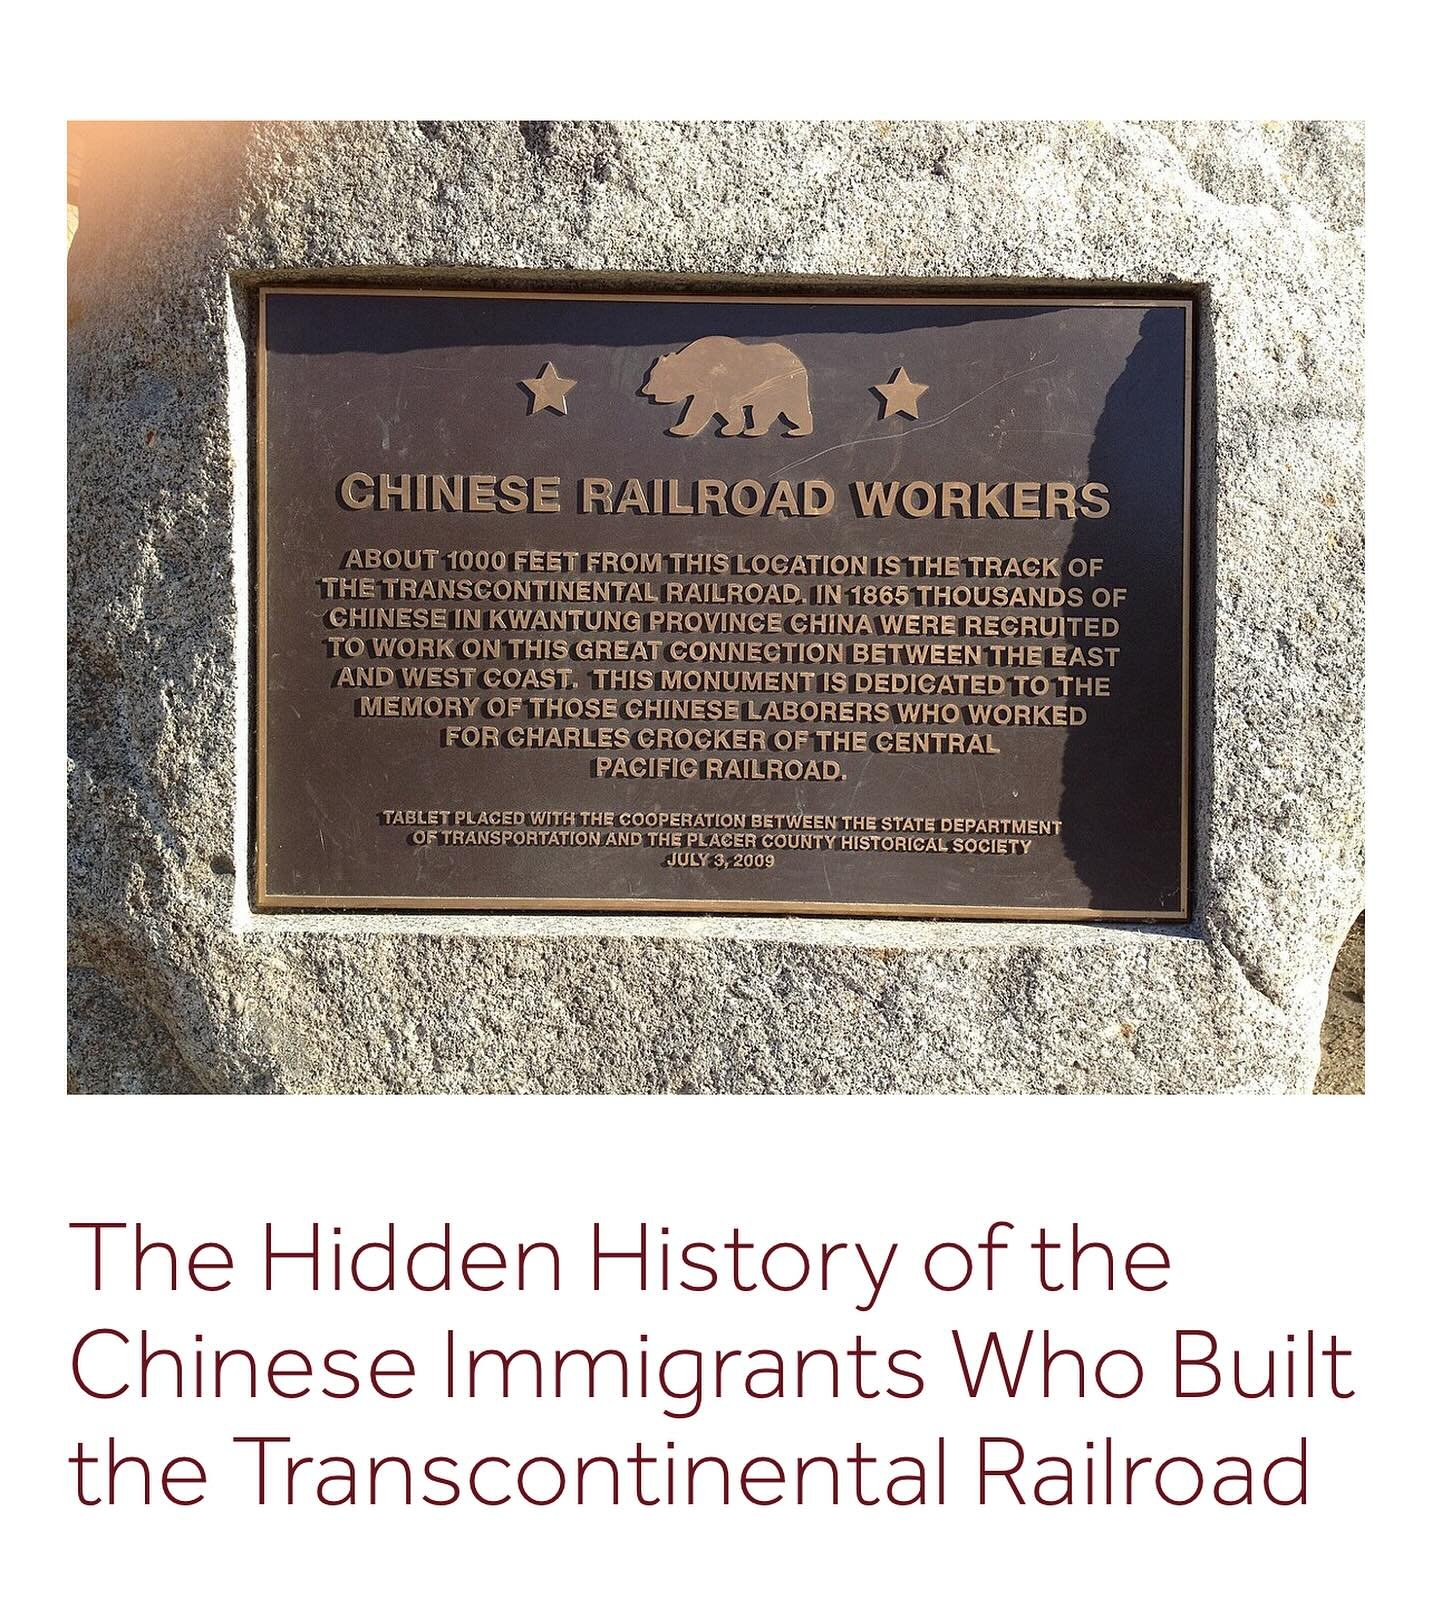 Did you know, coast-to-coast railway travel in the U.S. was made possible by Chinese immigrants? They braved dangerous working conditions for substandard pay to build America&rsquo;s first transcontinental railroad. At the height of the construction,